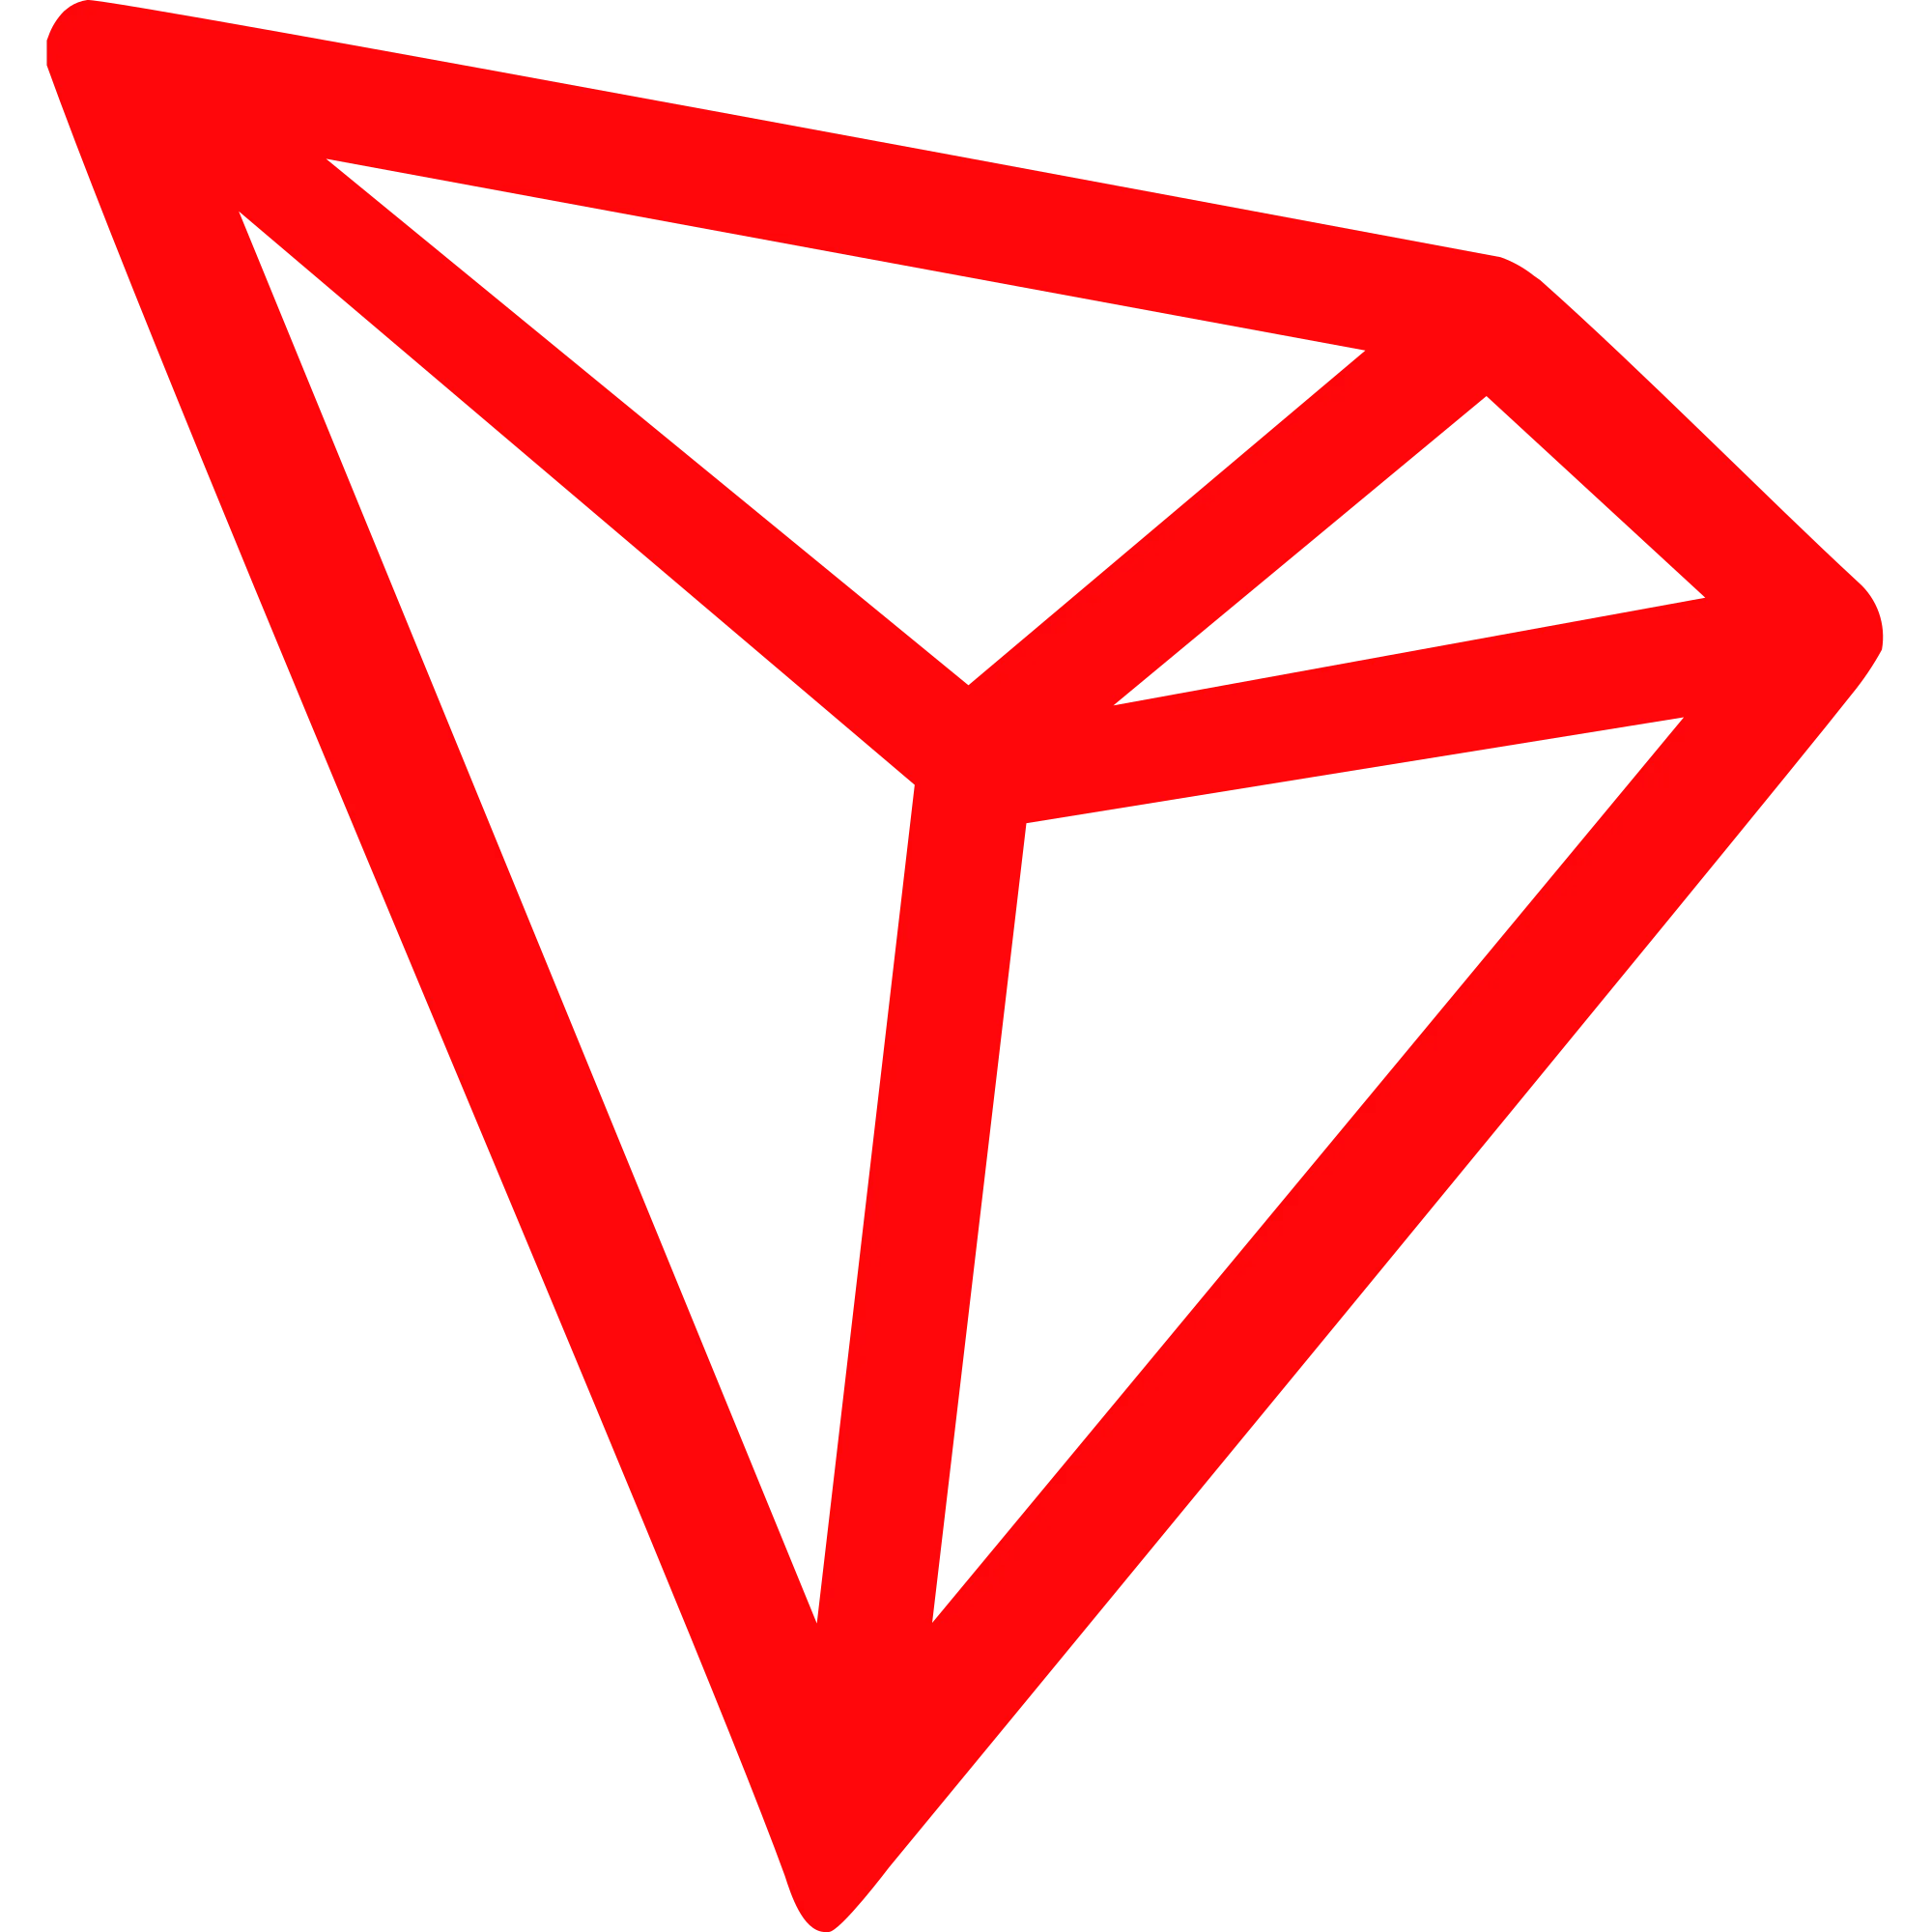 Best crypto to invest - TRON Trx